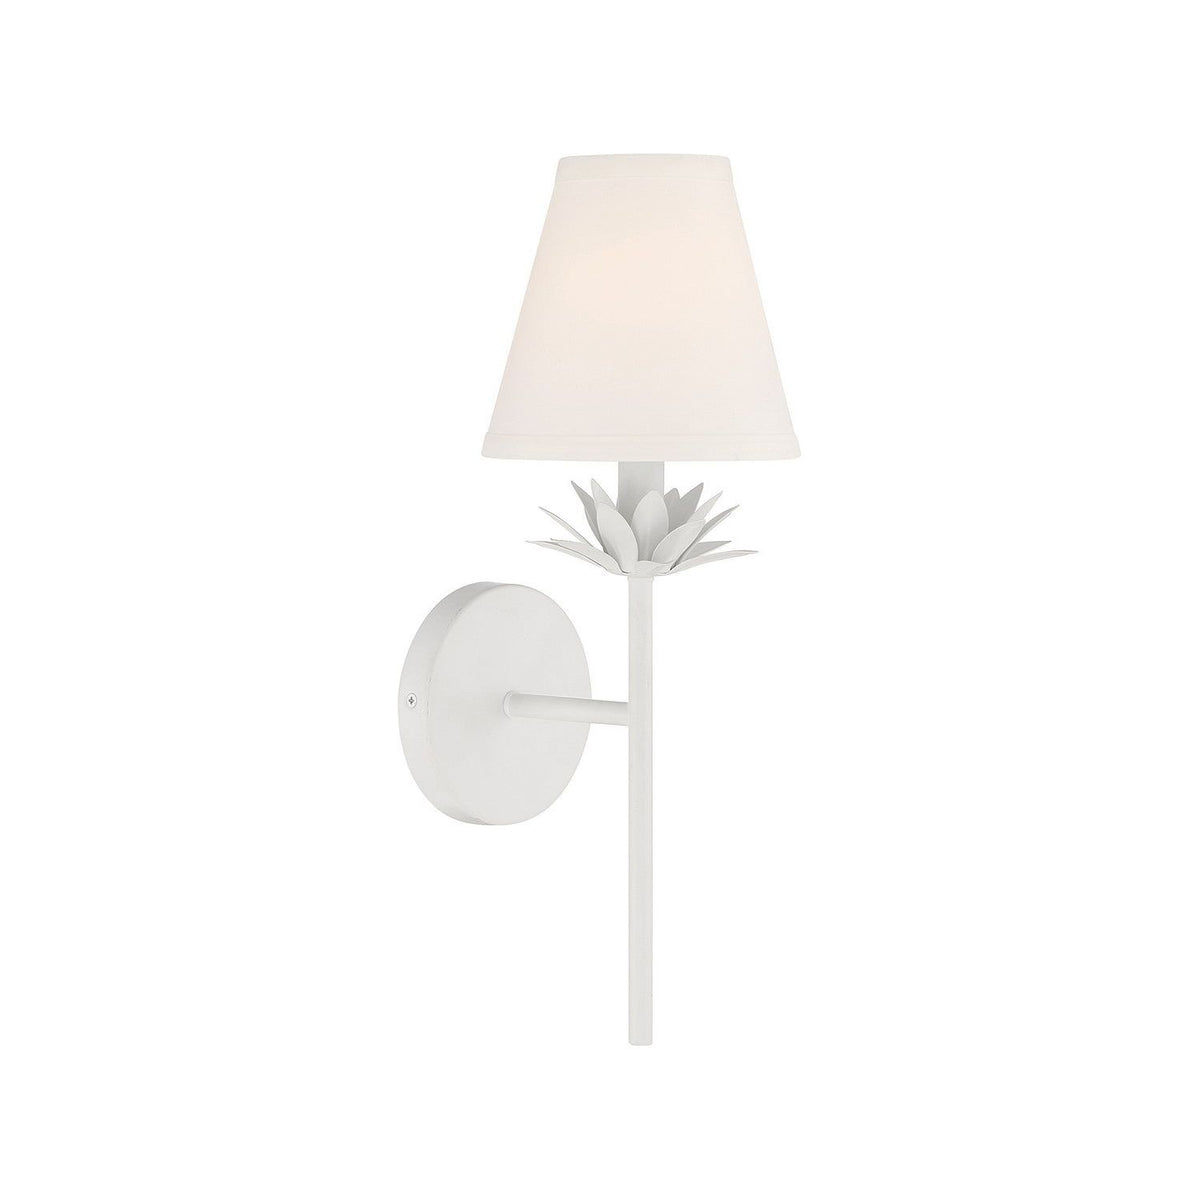 Meridian - M90077WH - One Light Wall Sconce - White